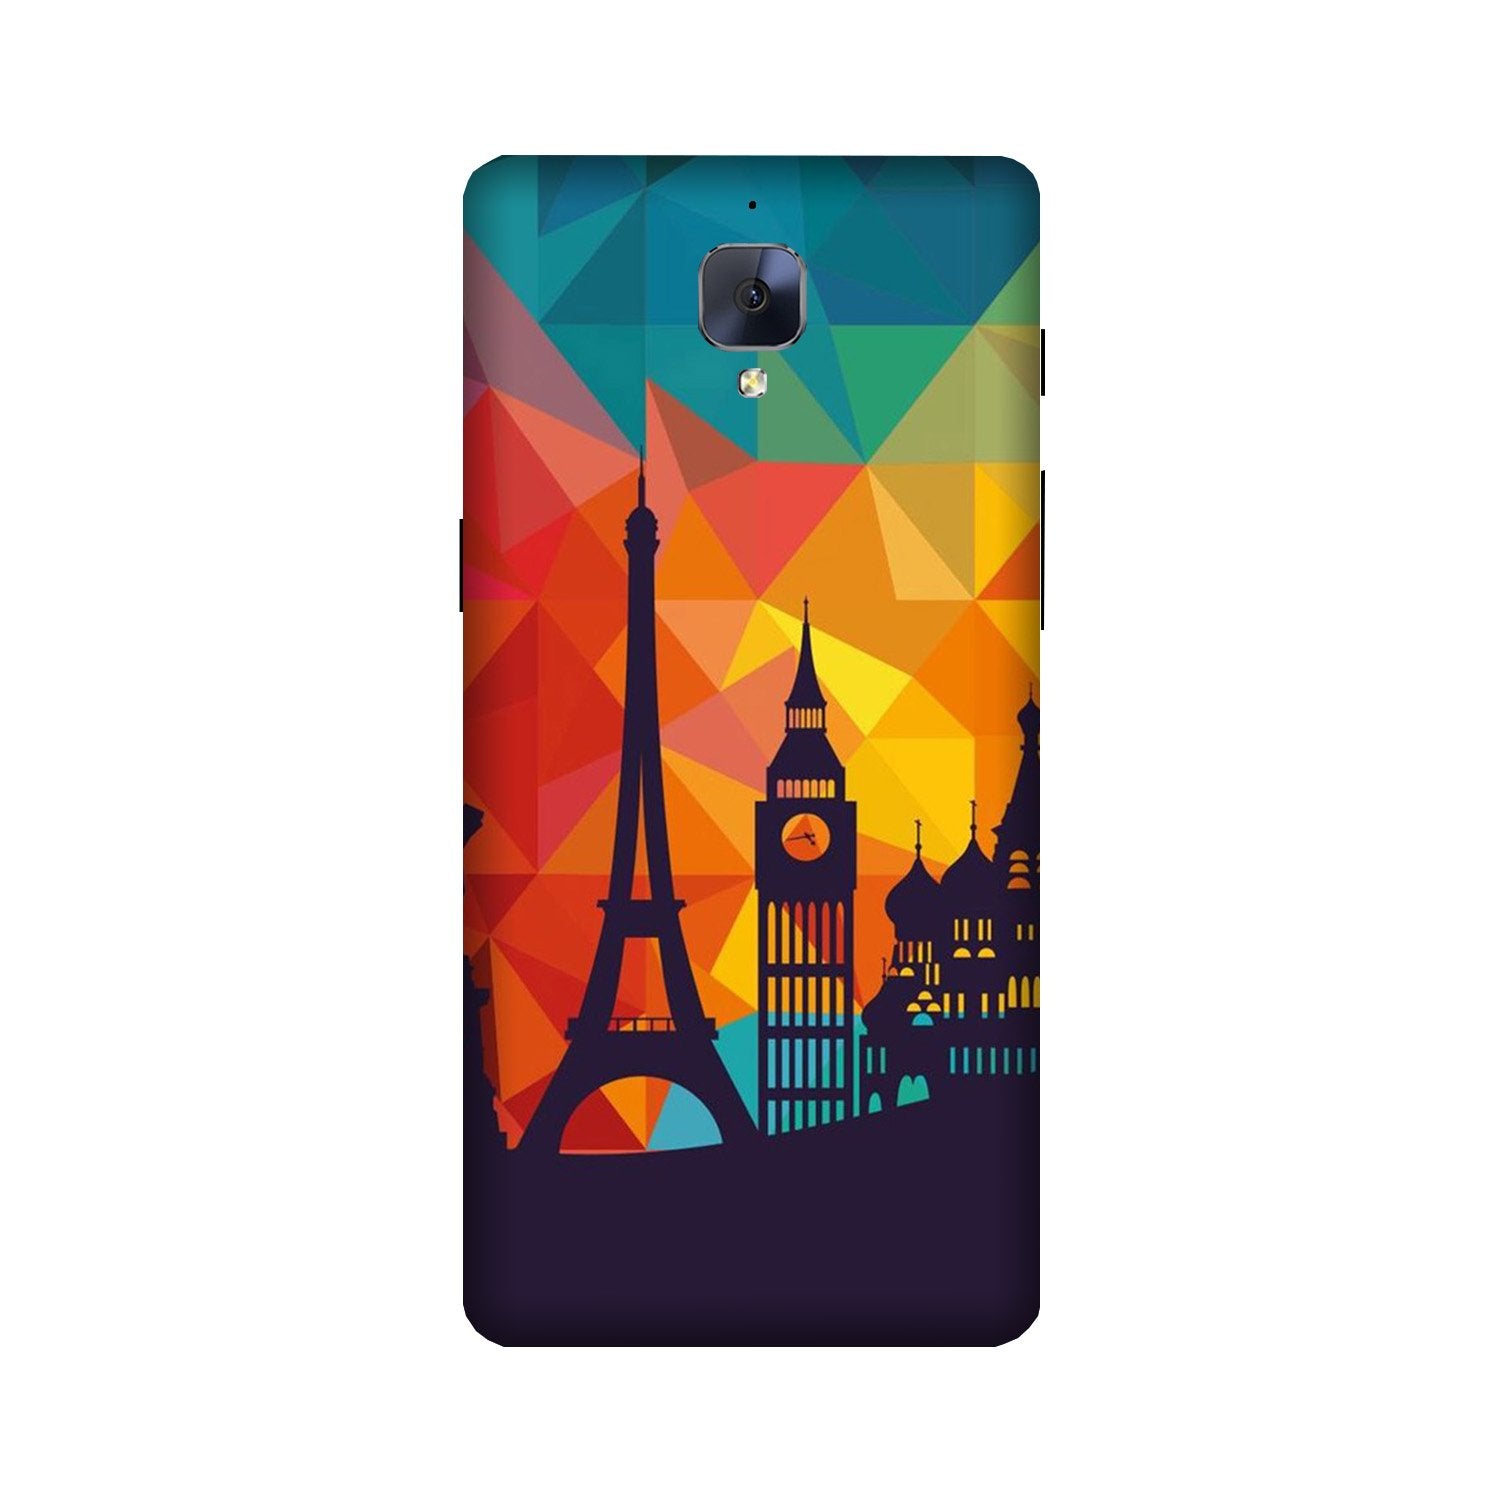 Eiffel Tower2 Case for OnePlus 3/ 3T